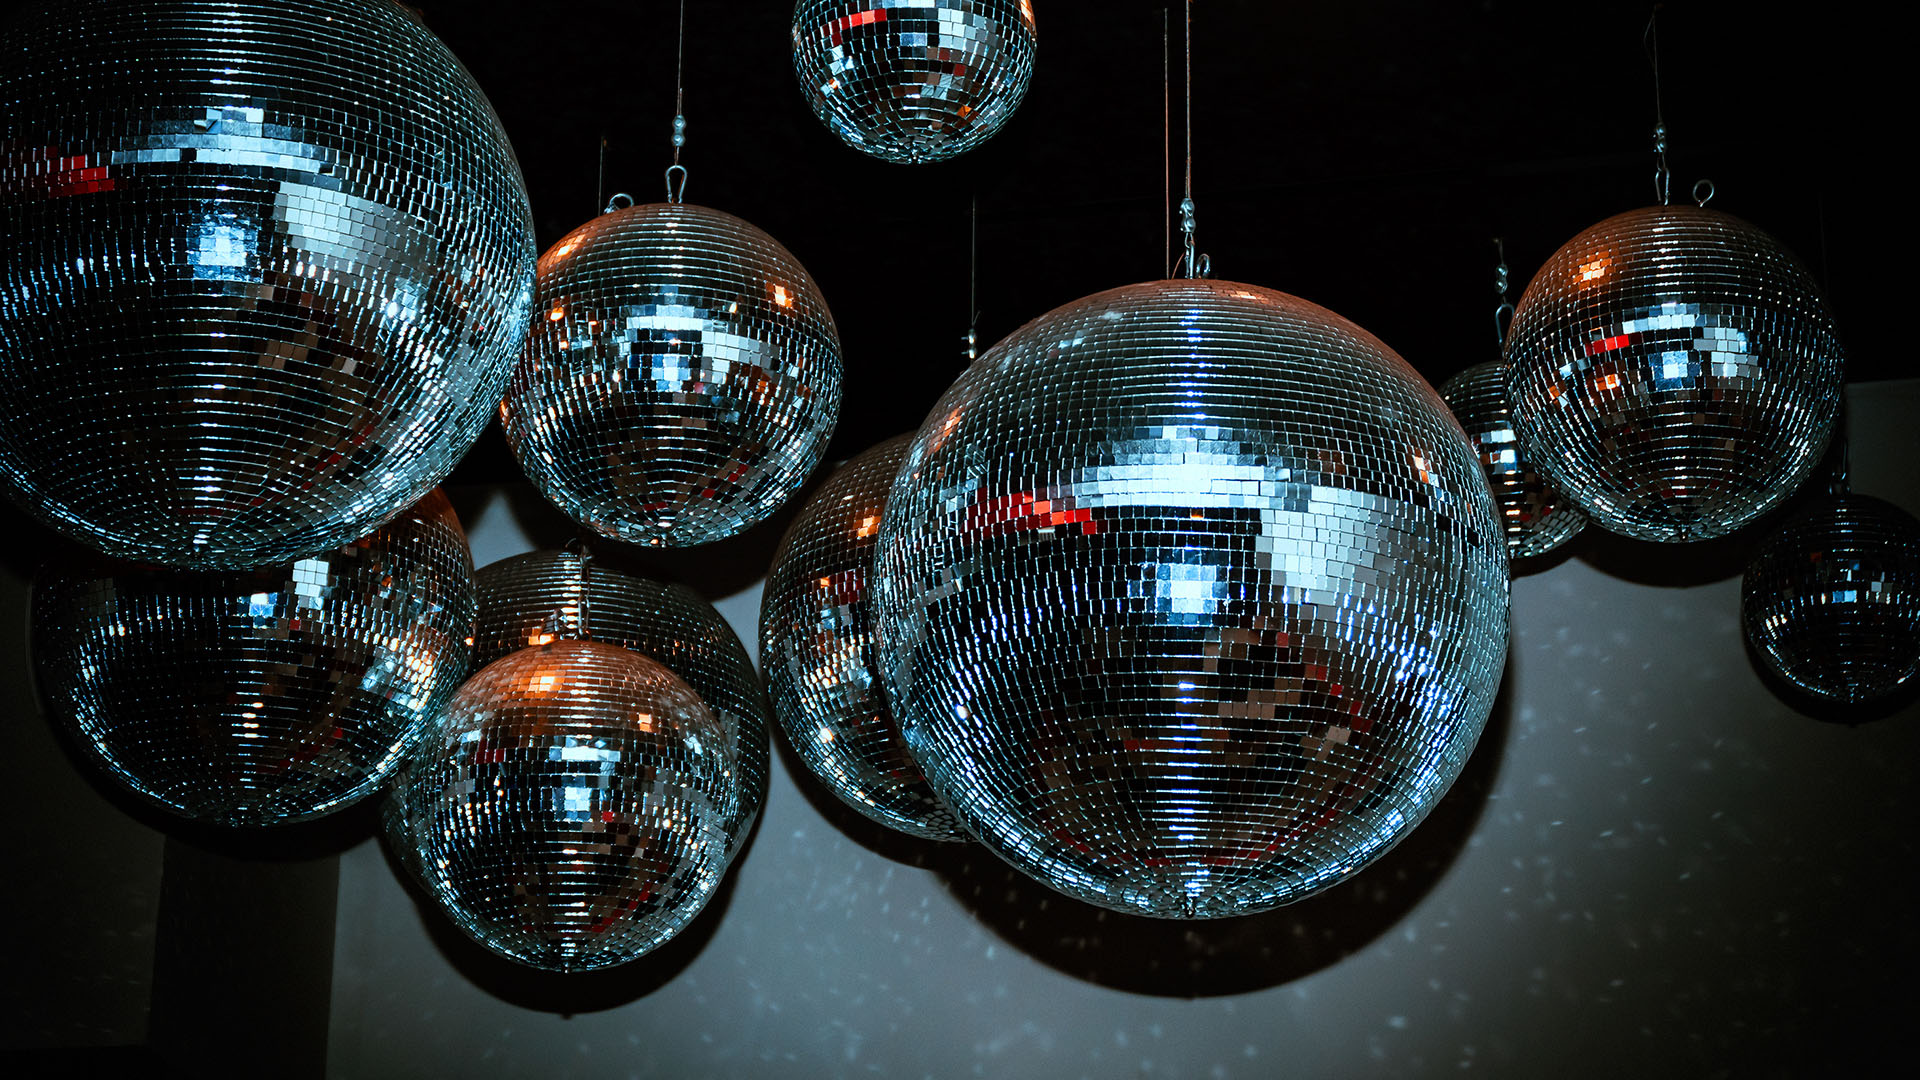 Disco balls hanging from ceiling in a nightclub room